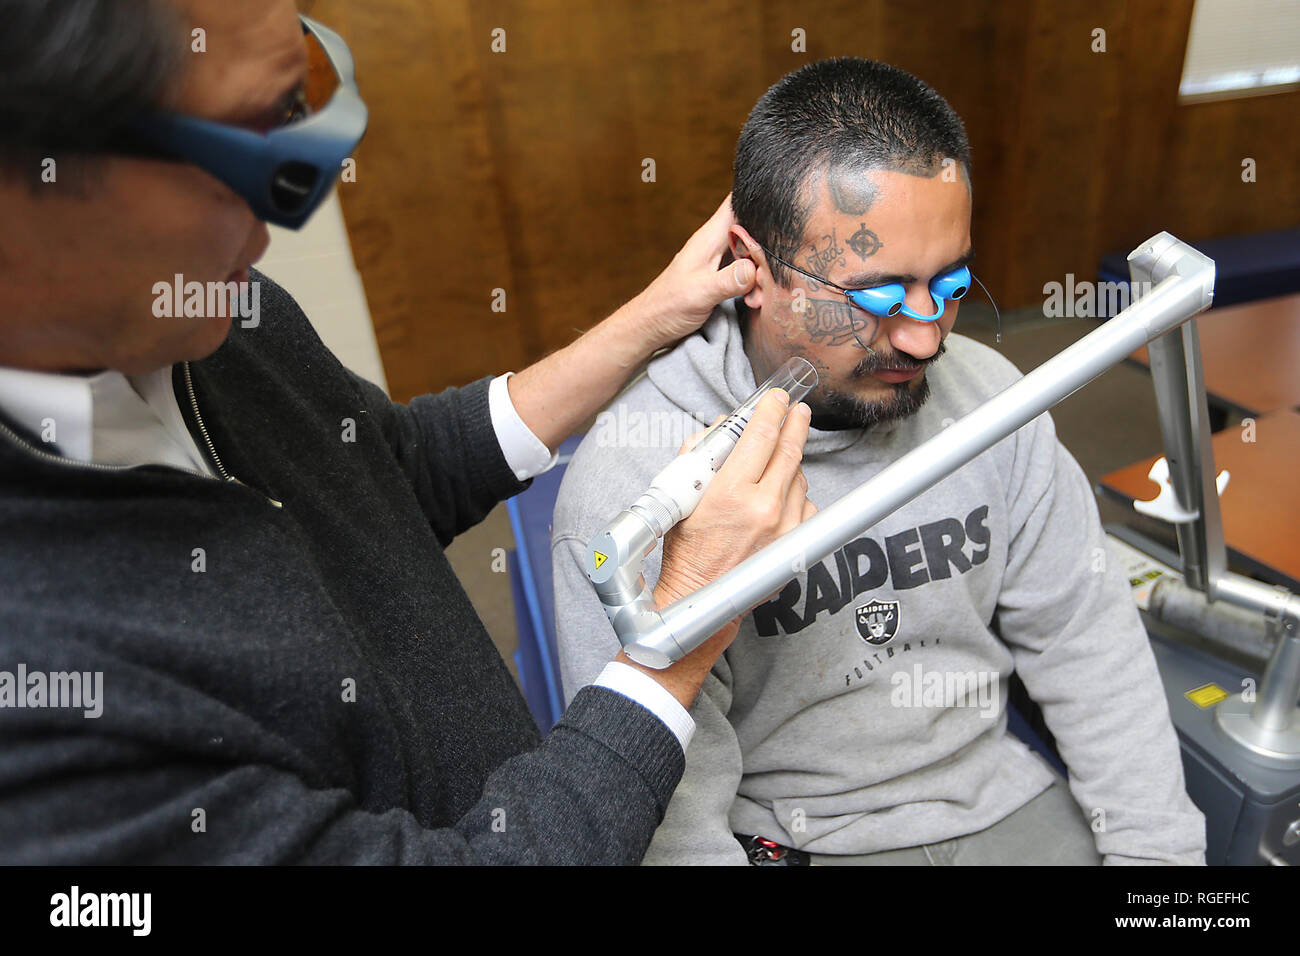 February 26, 2018 - Napa, CA, U.S. - Dr. William McClure, left of Napa Valley Plastic Surgery, removes a tattoo on the face of Jose De La Cruz at the Napa County Probation Department on Monday morning. (Credit Image: © Napa Valley Register via ZUMA Wire) Stock Photo